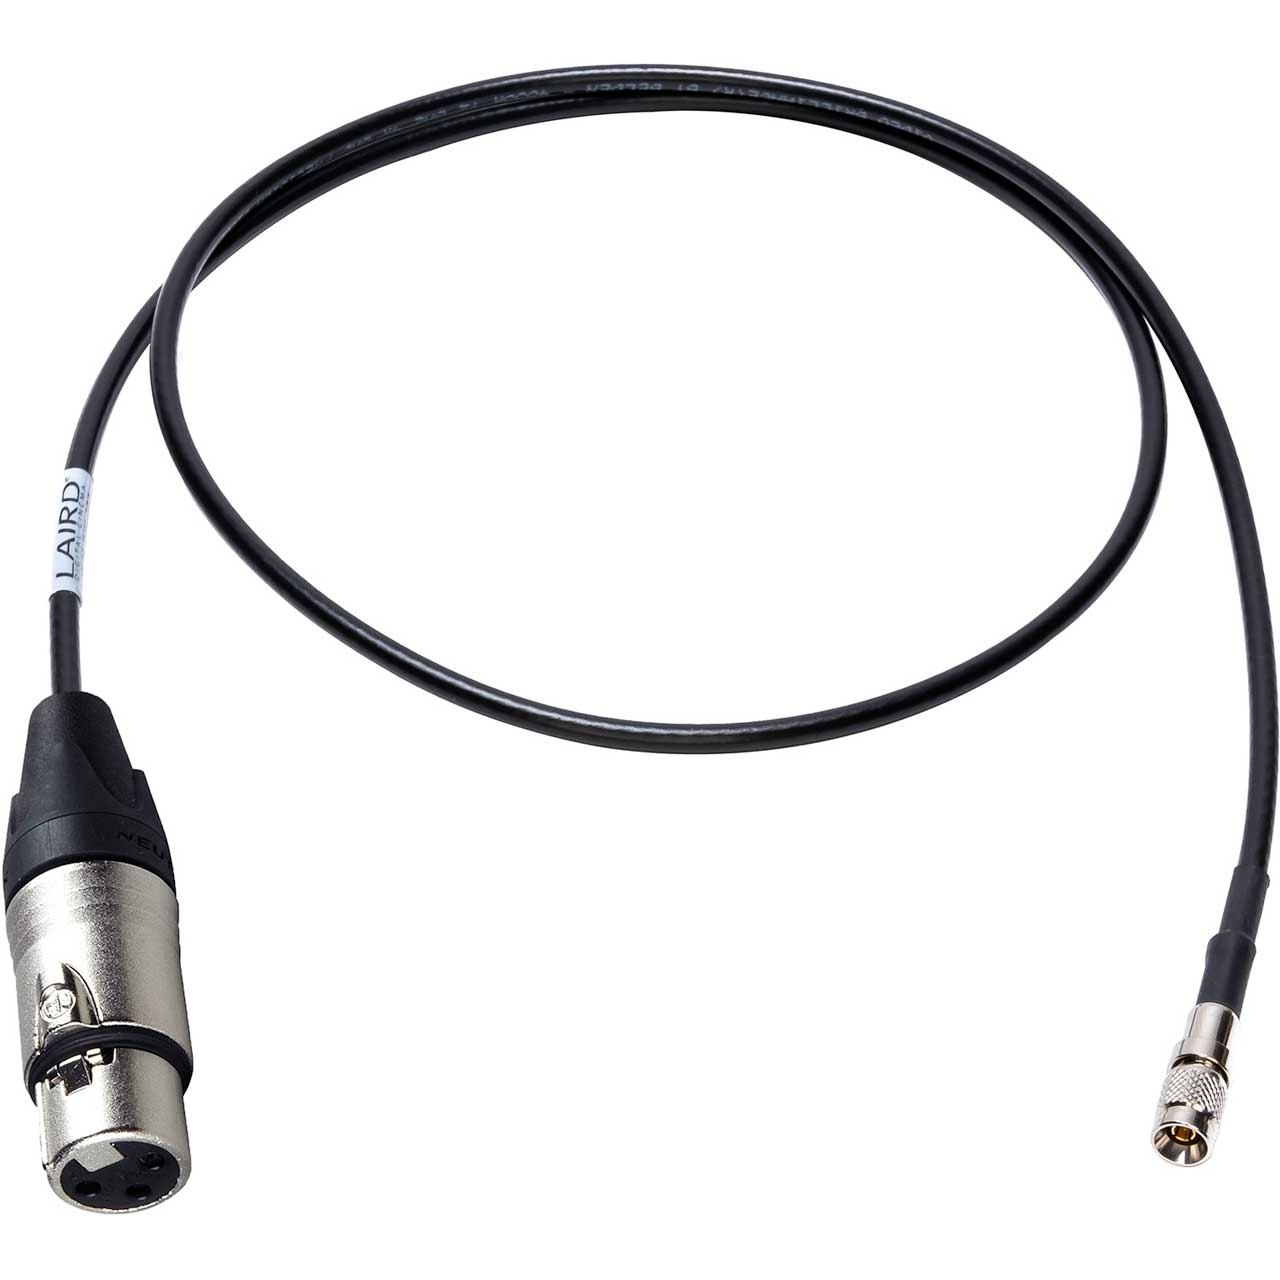 Laird XLF-DIN-006 DIN 1.0/2.3 to XLR-M Time Code Cable - 6 Foot XLF-DIN-006